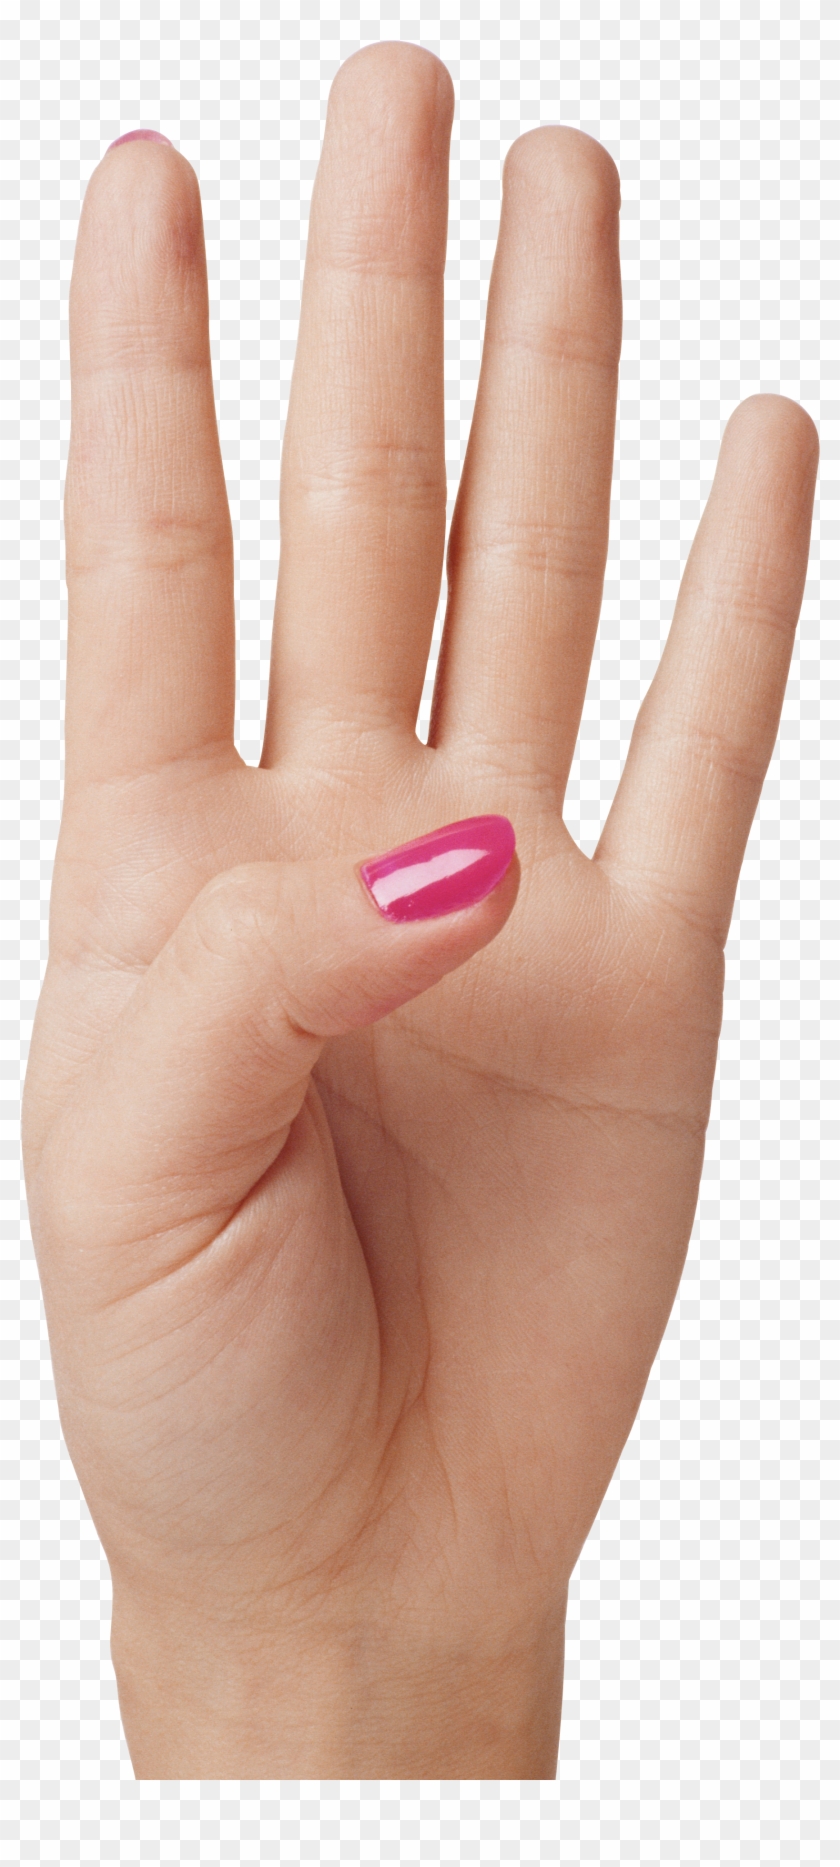 Hand Showing Four Fingers Png Clipart Image - Hand Showing Four Fingers Transparent Png #975627